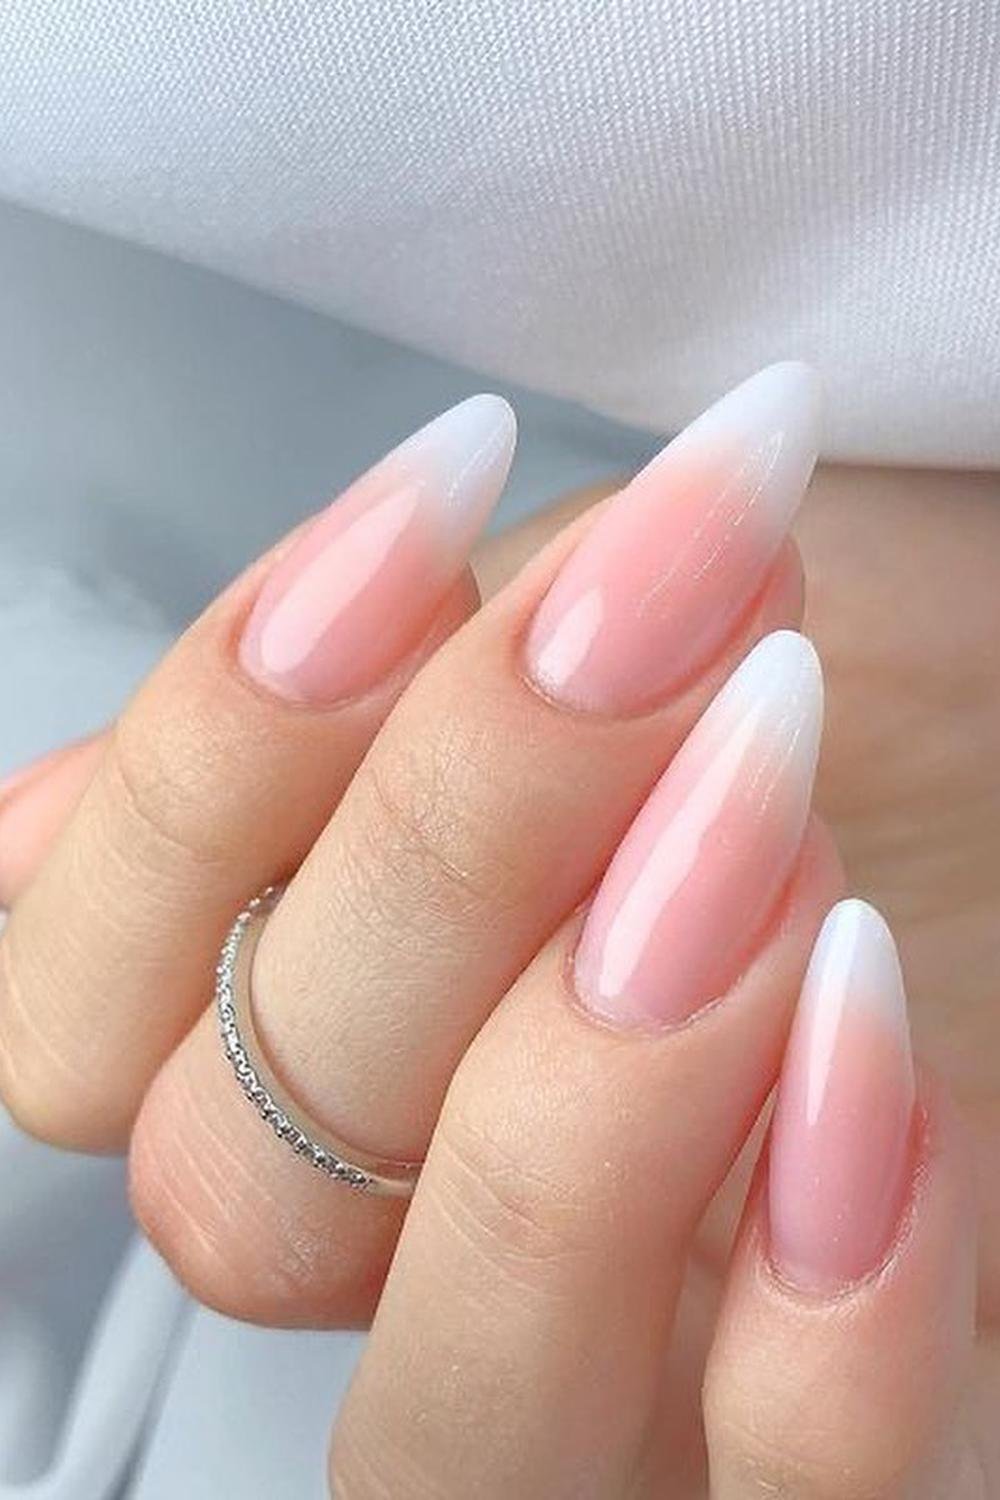 24 - Picture of Baby Boomer Nails